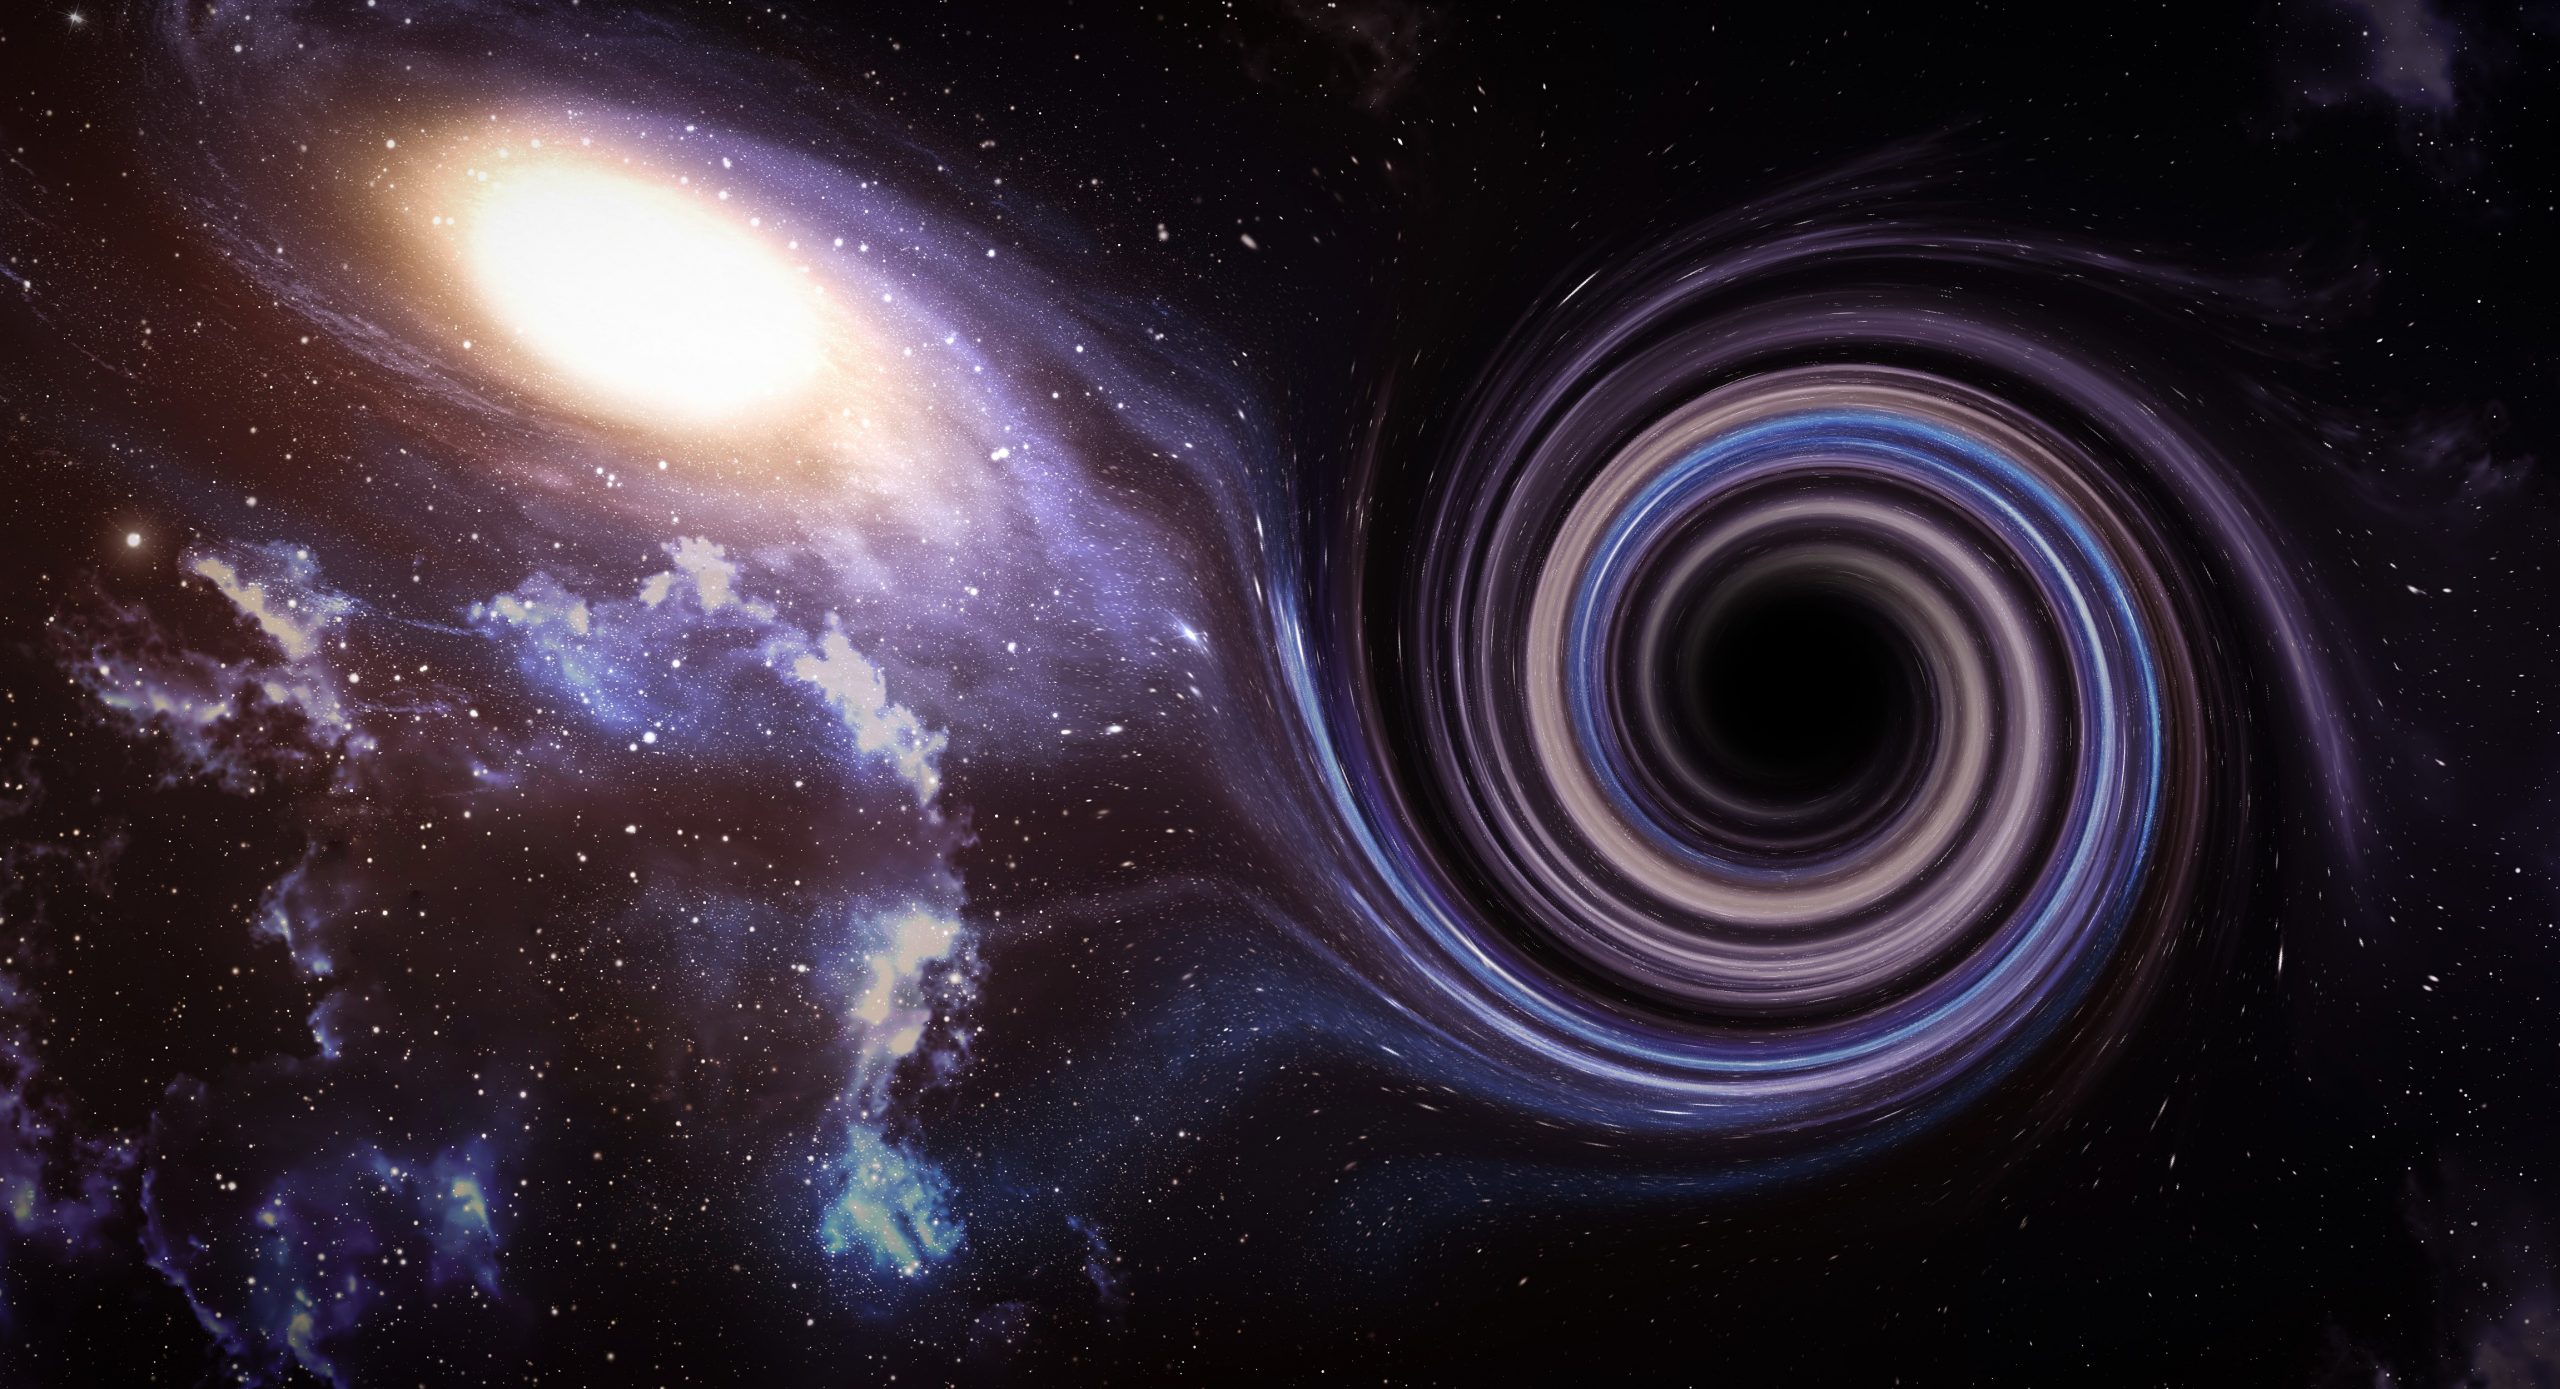 Astronomers believe that supermassive black holes formed as soon as the first seconds after the Big Bang. Credit: NASA and M. Weiss (Chandra X-ray Center)